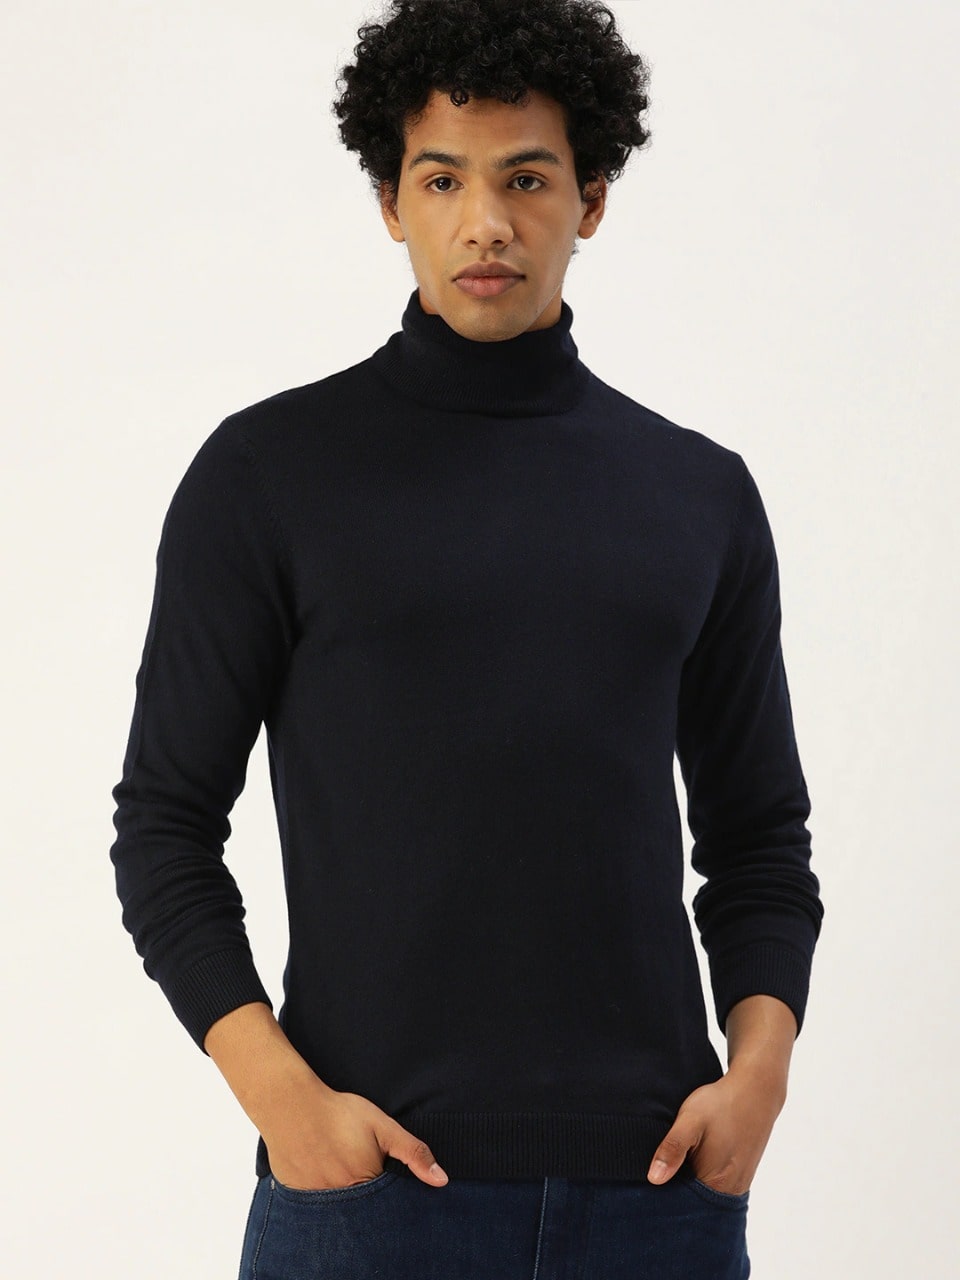 Men Navy Blue Solid Pullover Sweater